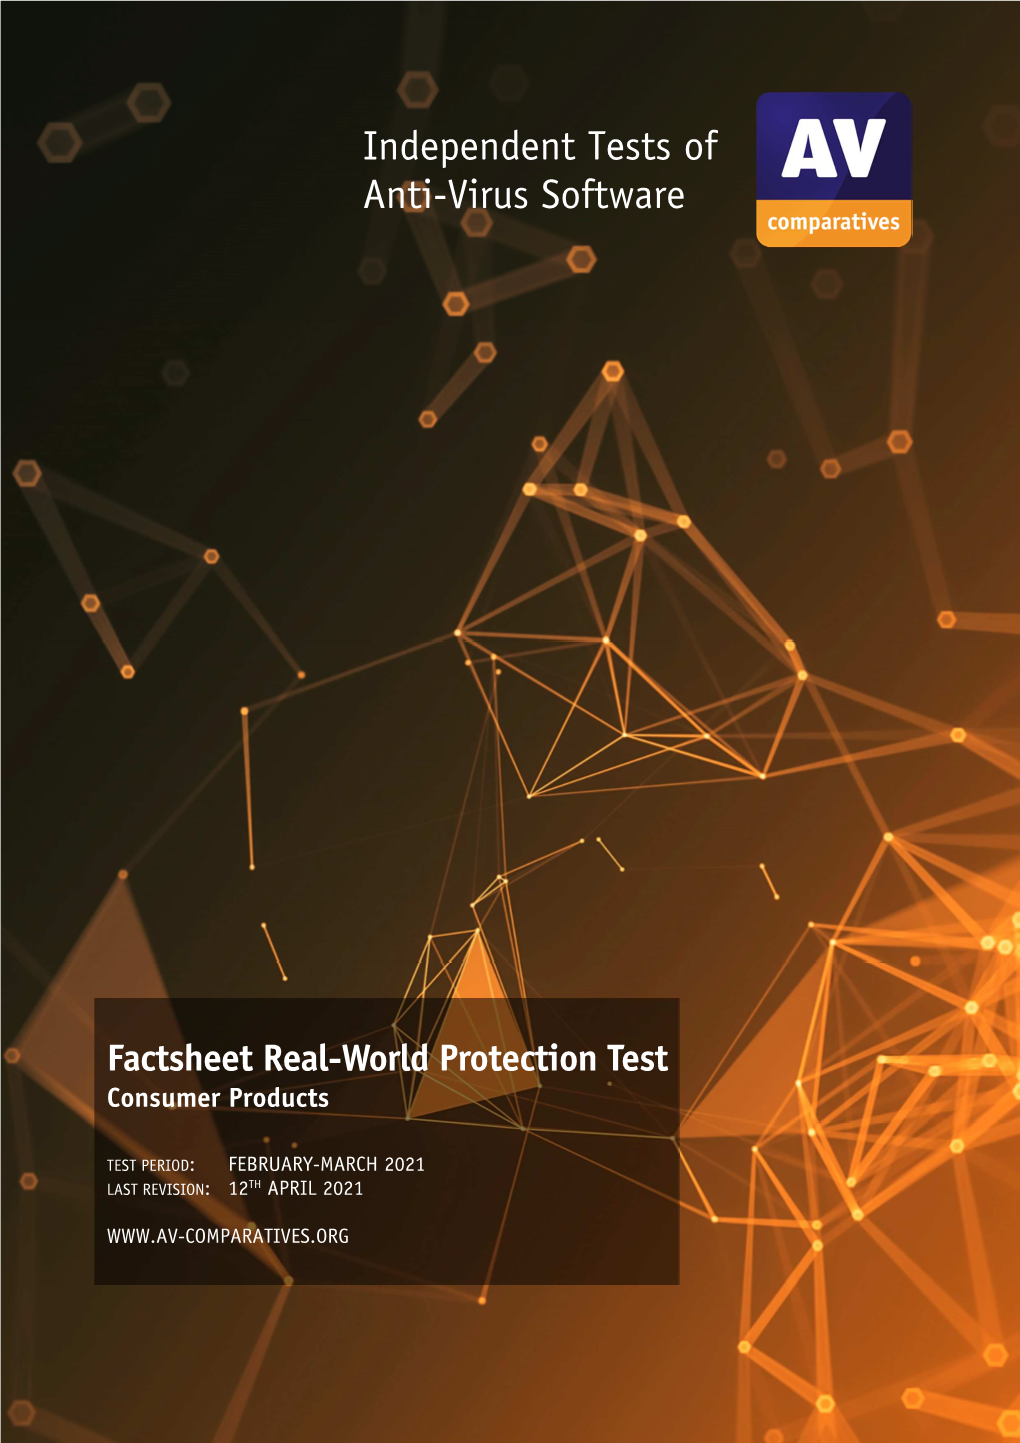 Factsheet Real-World Protection Test February-March 2021